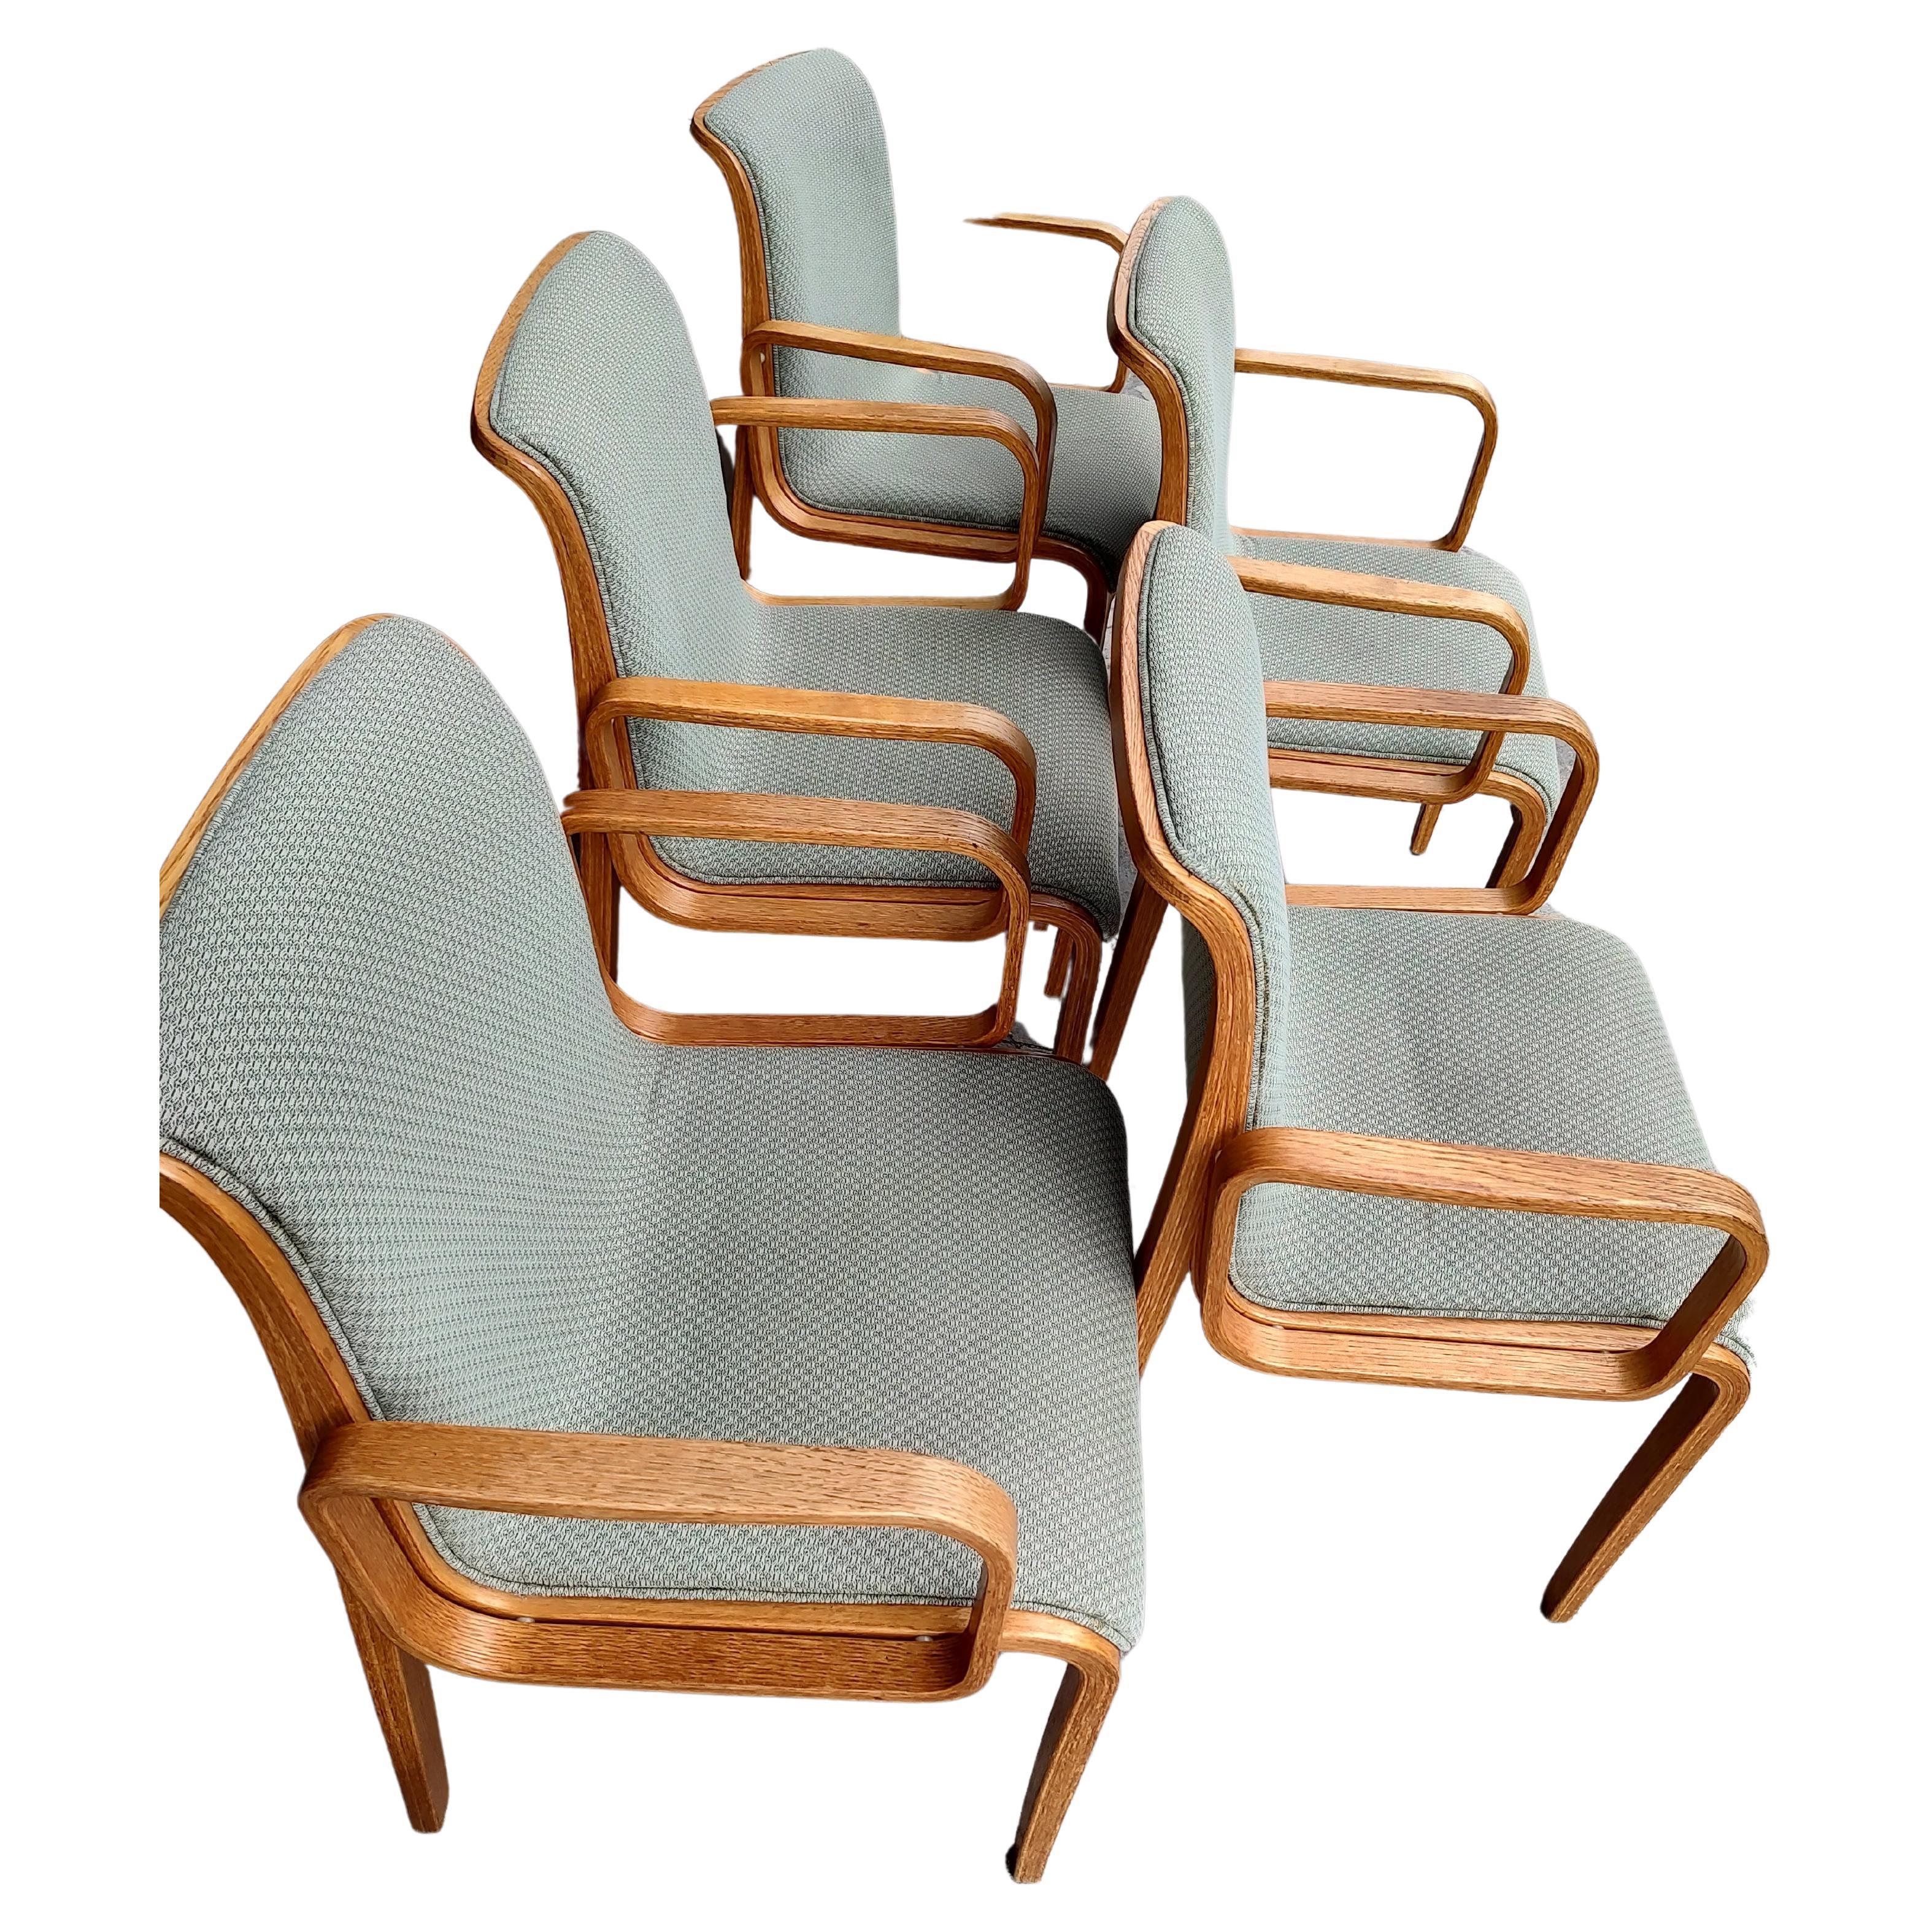 Late 20th Century Mid-Century Modern Oak Armchairs Bill Stephens for Knoll International 5 Avail. For Sale